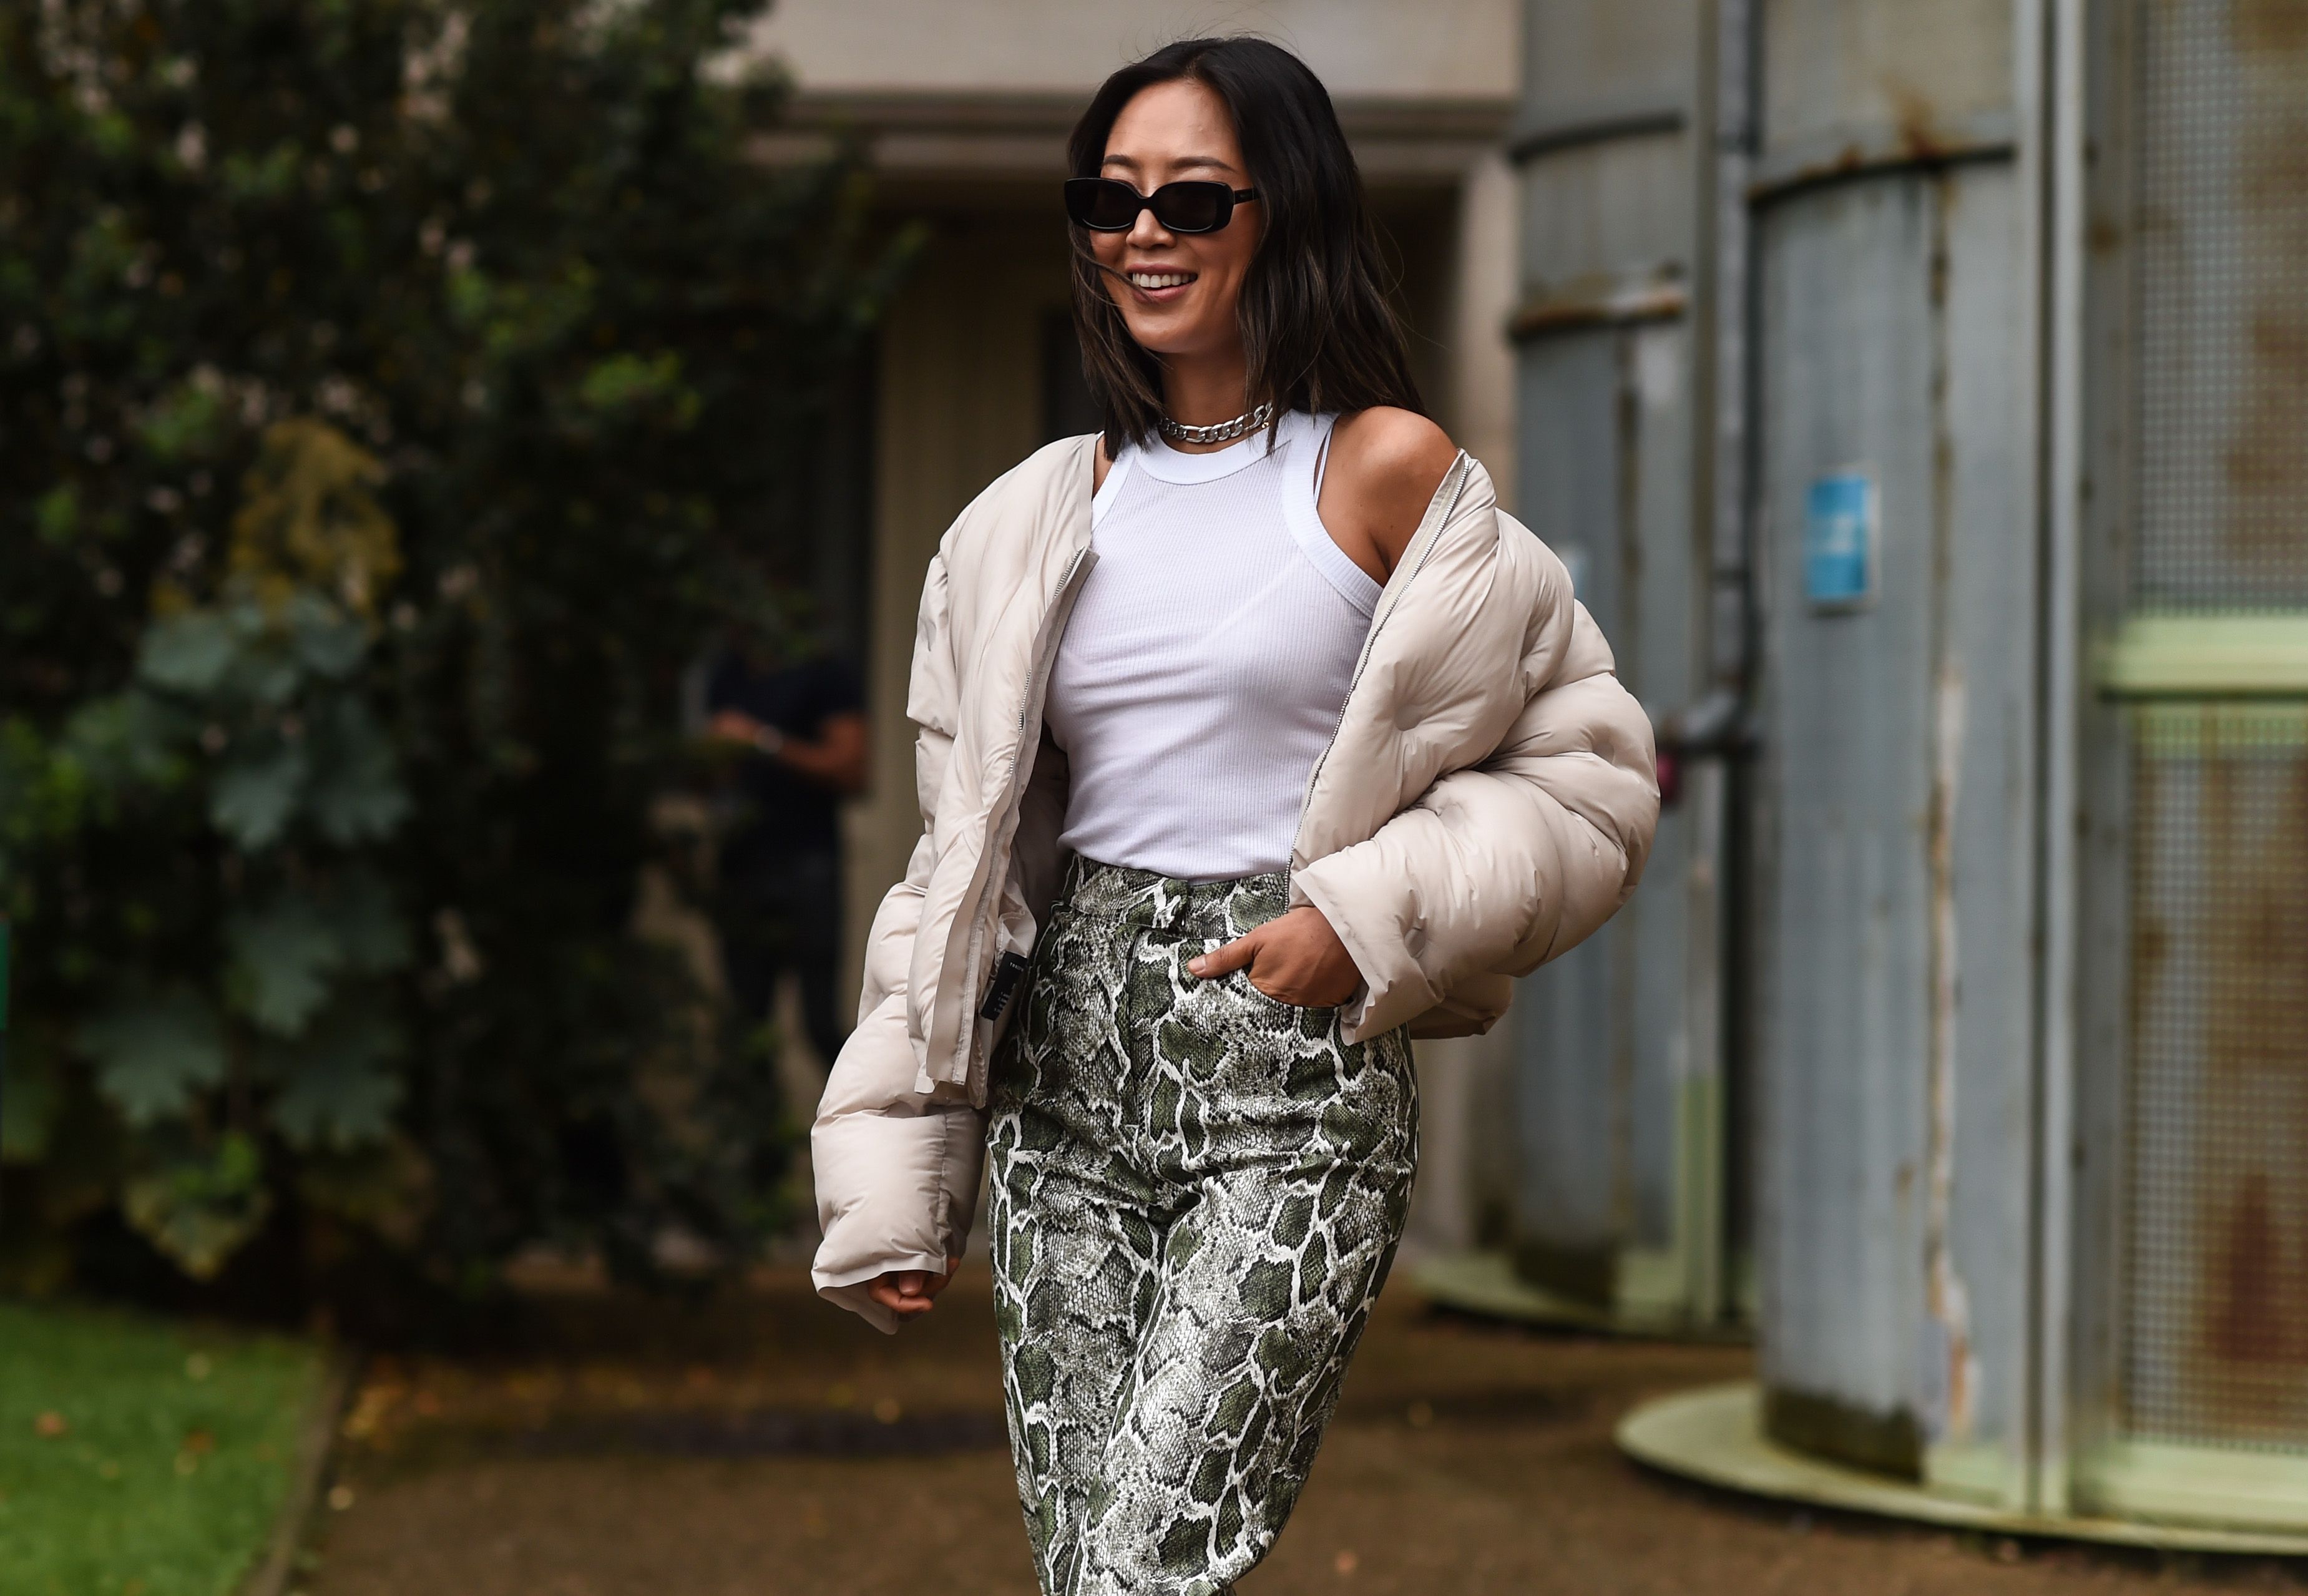 The Chanel 19 Maxi Flap bag is on every style influencer's